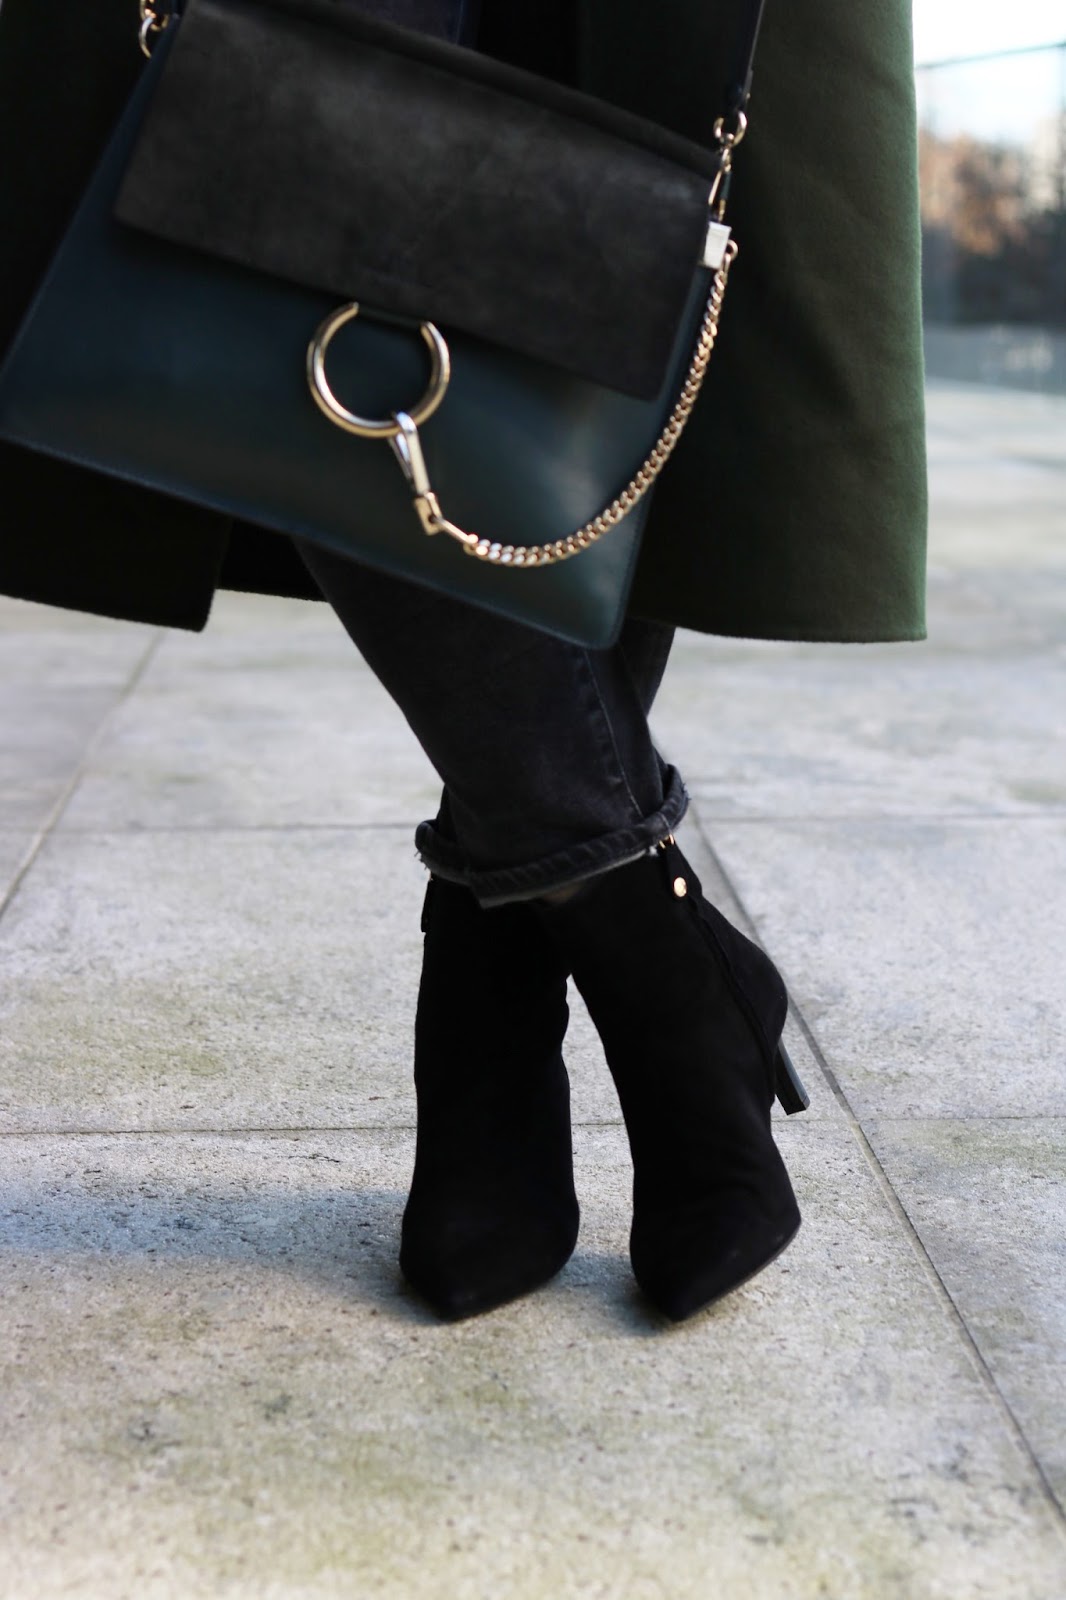 le chateau turtleneck outfit sandro green wool coat levis wedgie jeans geox ankle boots chloe faye bag